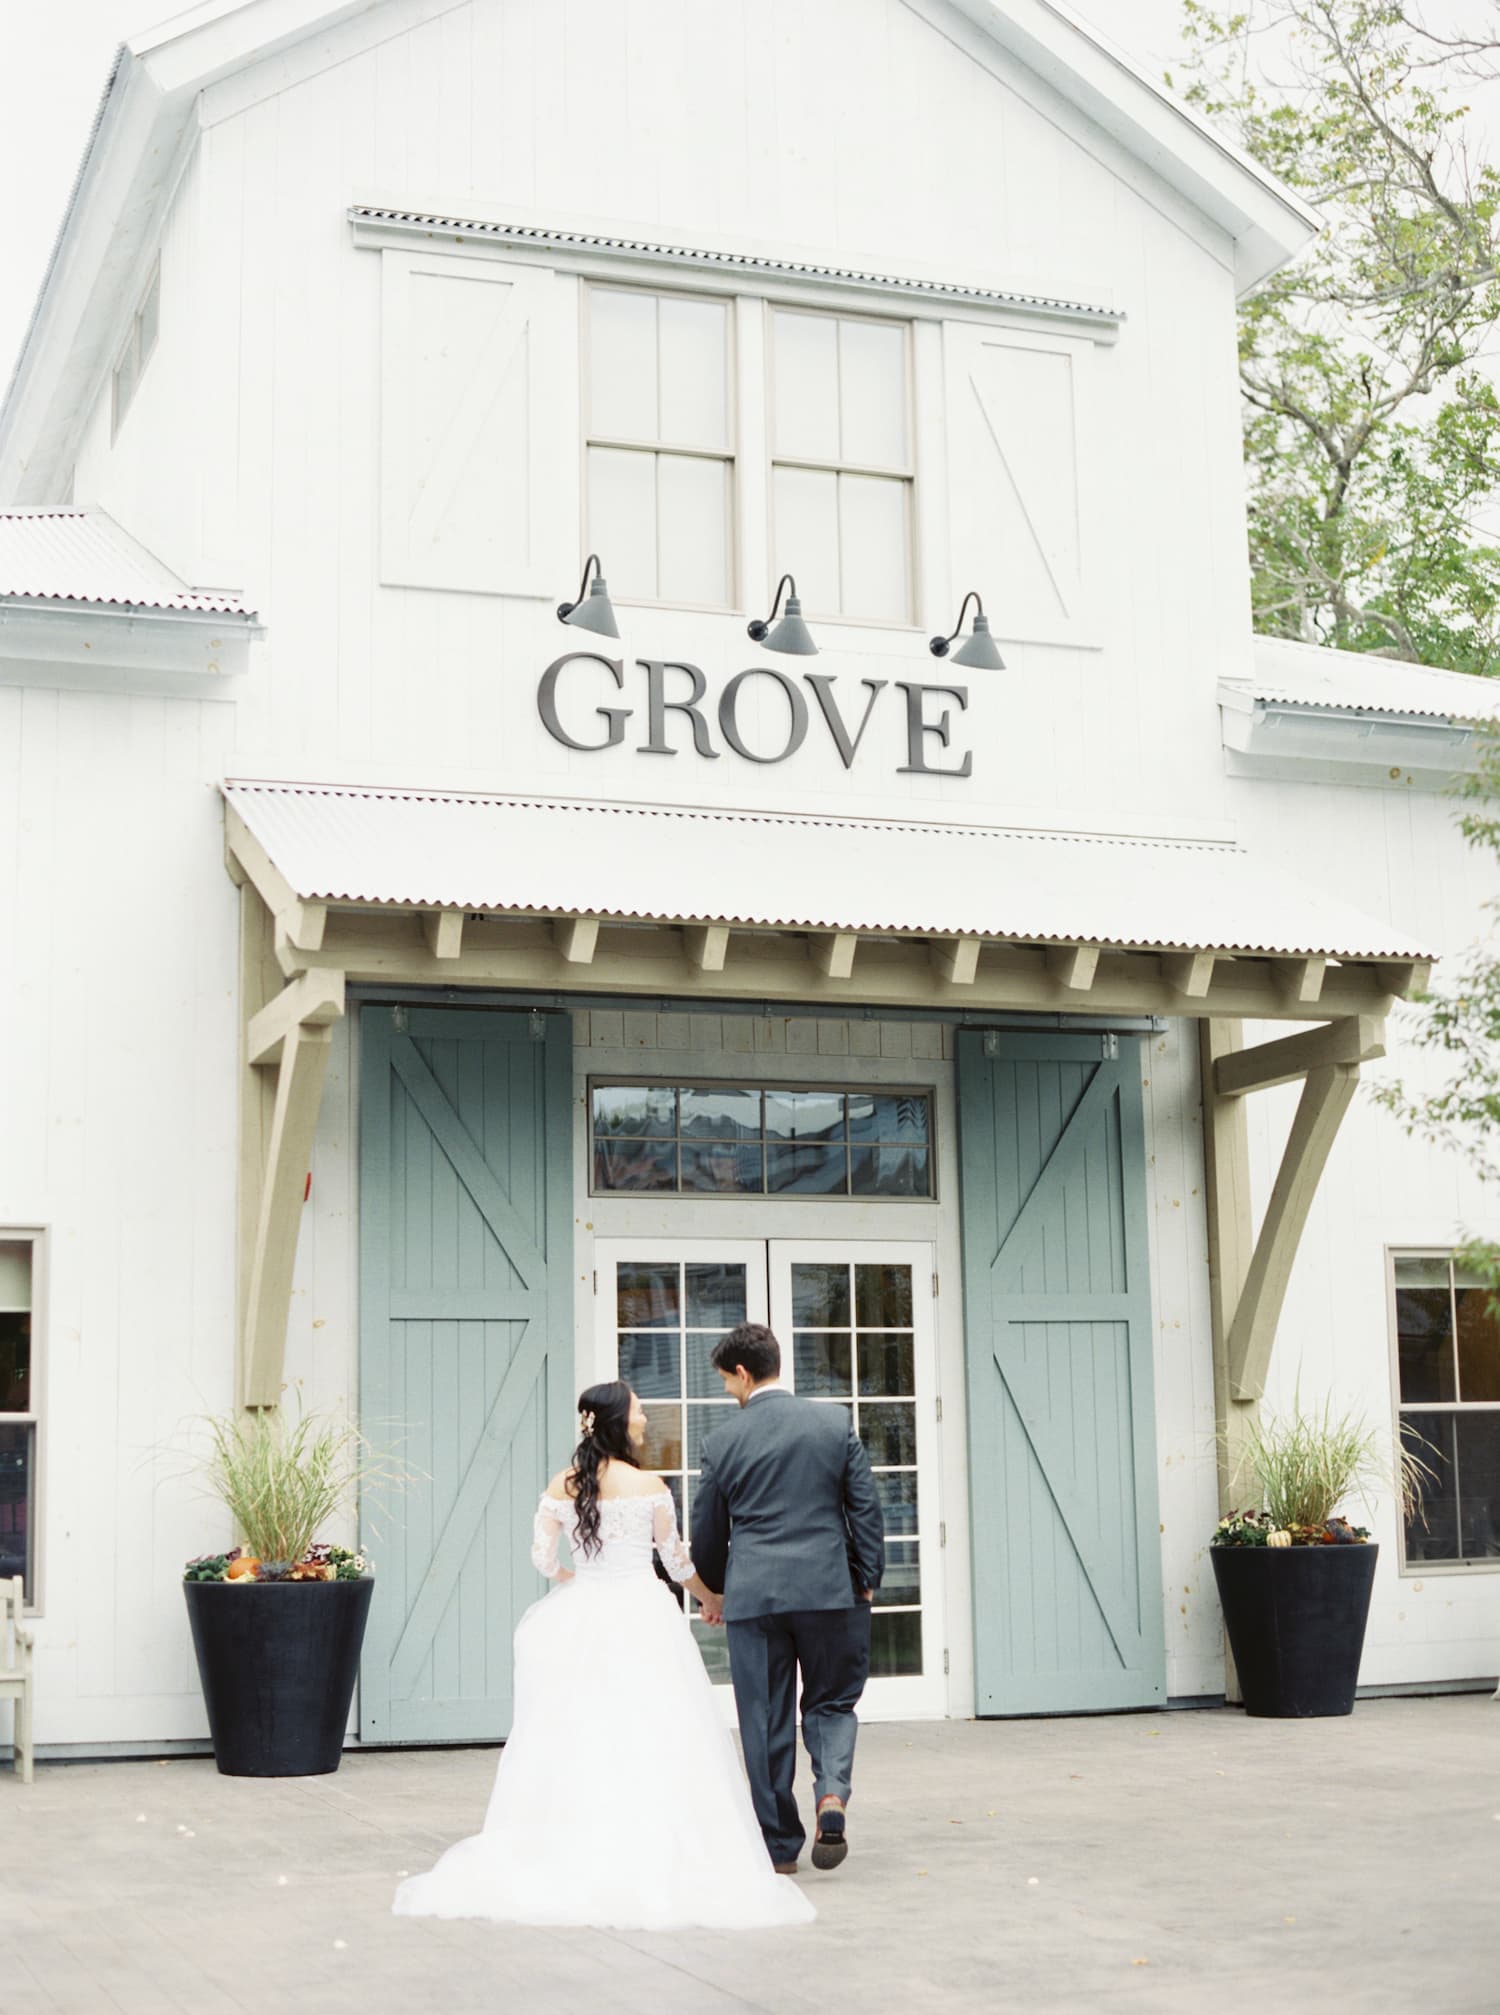 8 Secret Wedding Planning Tips I Wish I Would Have Known. Bride and groom stroll into The Grove during their wedding shoot.